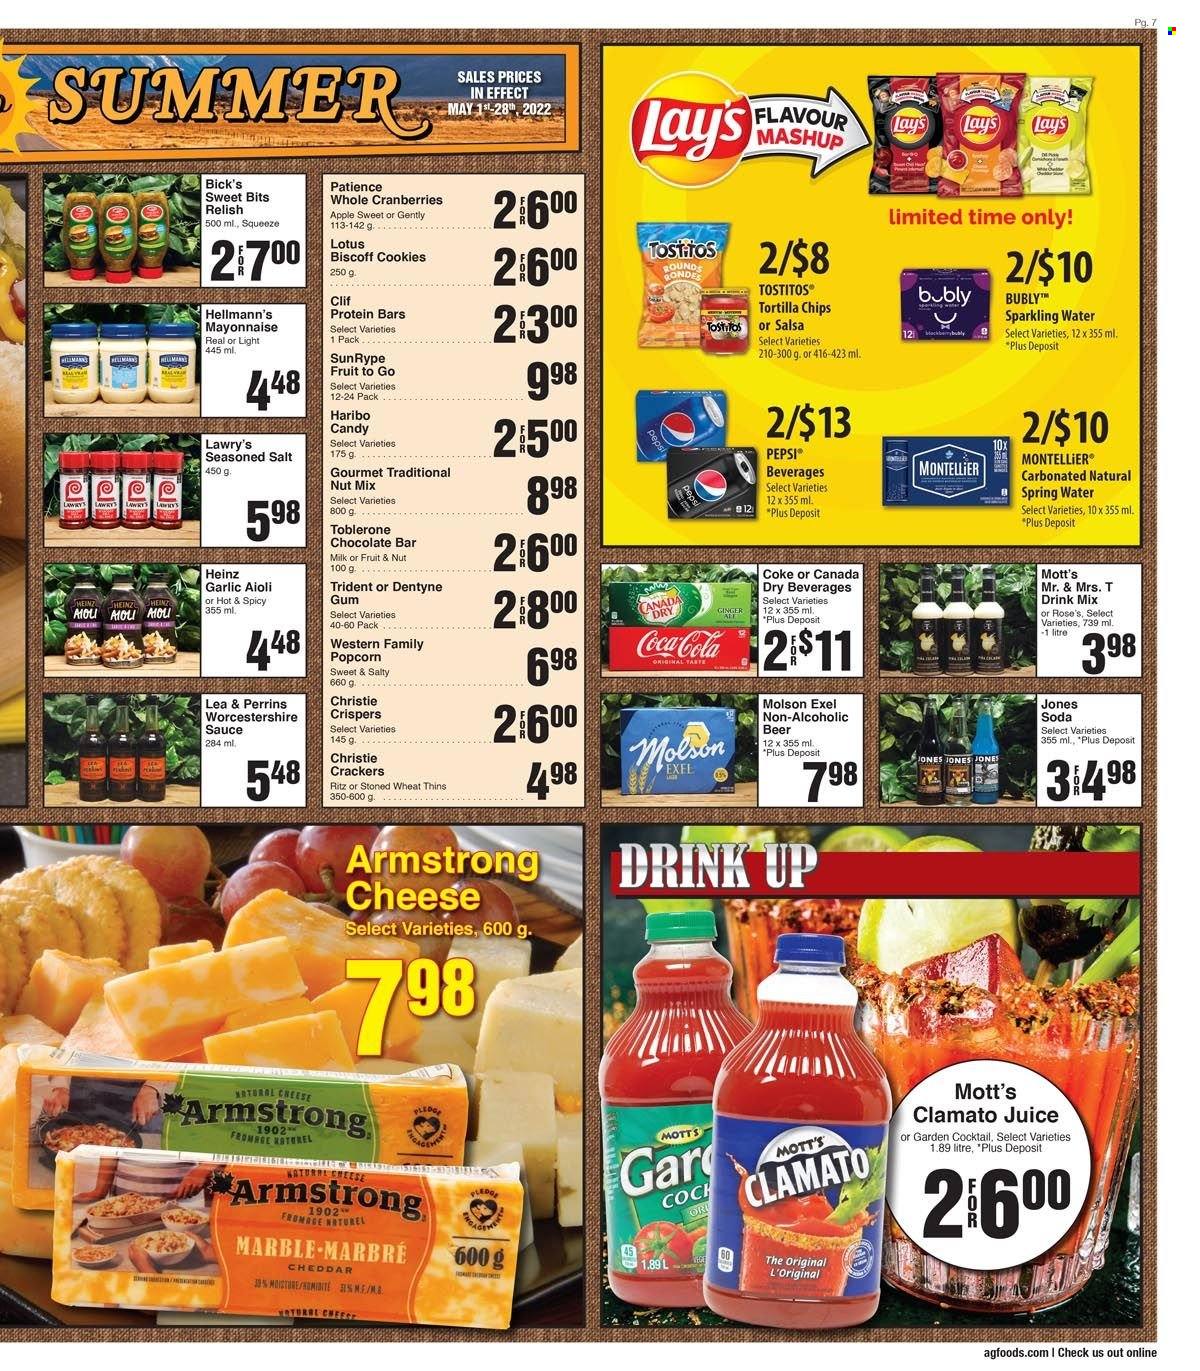 thumbnail - AG Foods Flyer - May 15, 2022 - May 21, 2022 - Sales products - garlic, ginger, Mott's, sauce, cheese, milk, mayonnaise, Hellmann’s, cookies, Haribo, crackers, Toblerone, Trident, RITZ, chocolate bar, tortilla chips, chips, Lay’s, Thins, popcorn, Tostitos, salt, cranberries, protein bar, worcestershire sauce, salsa, Canada Dry, Coca-Cola, Pepsi, juice, Clamato, spring water, soda, sparkling water, rosé wine, beer, Cif, Lotus, Heinz. Page 7.